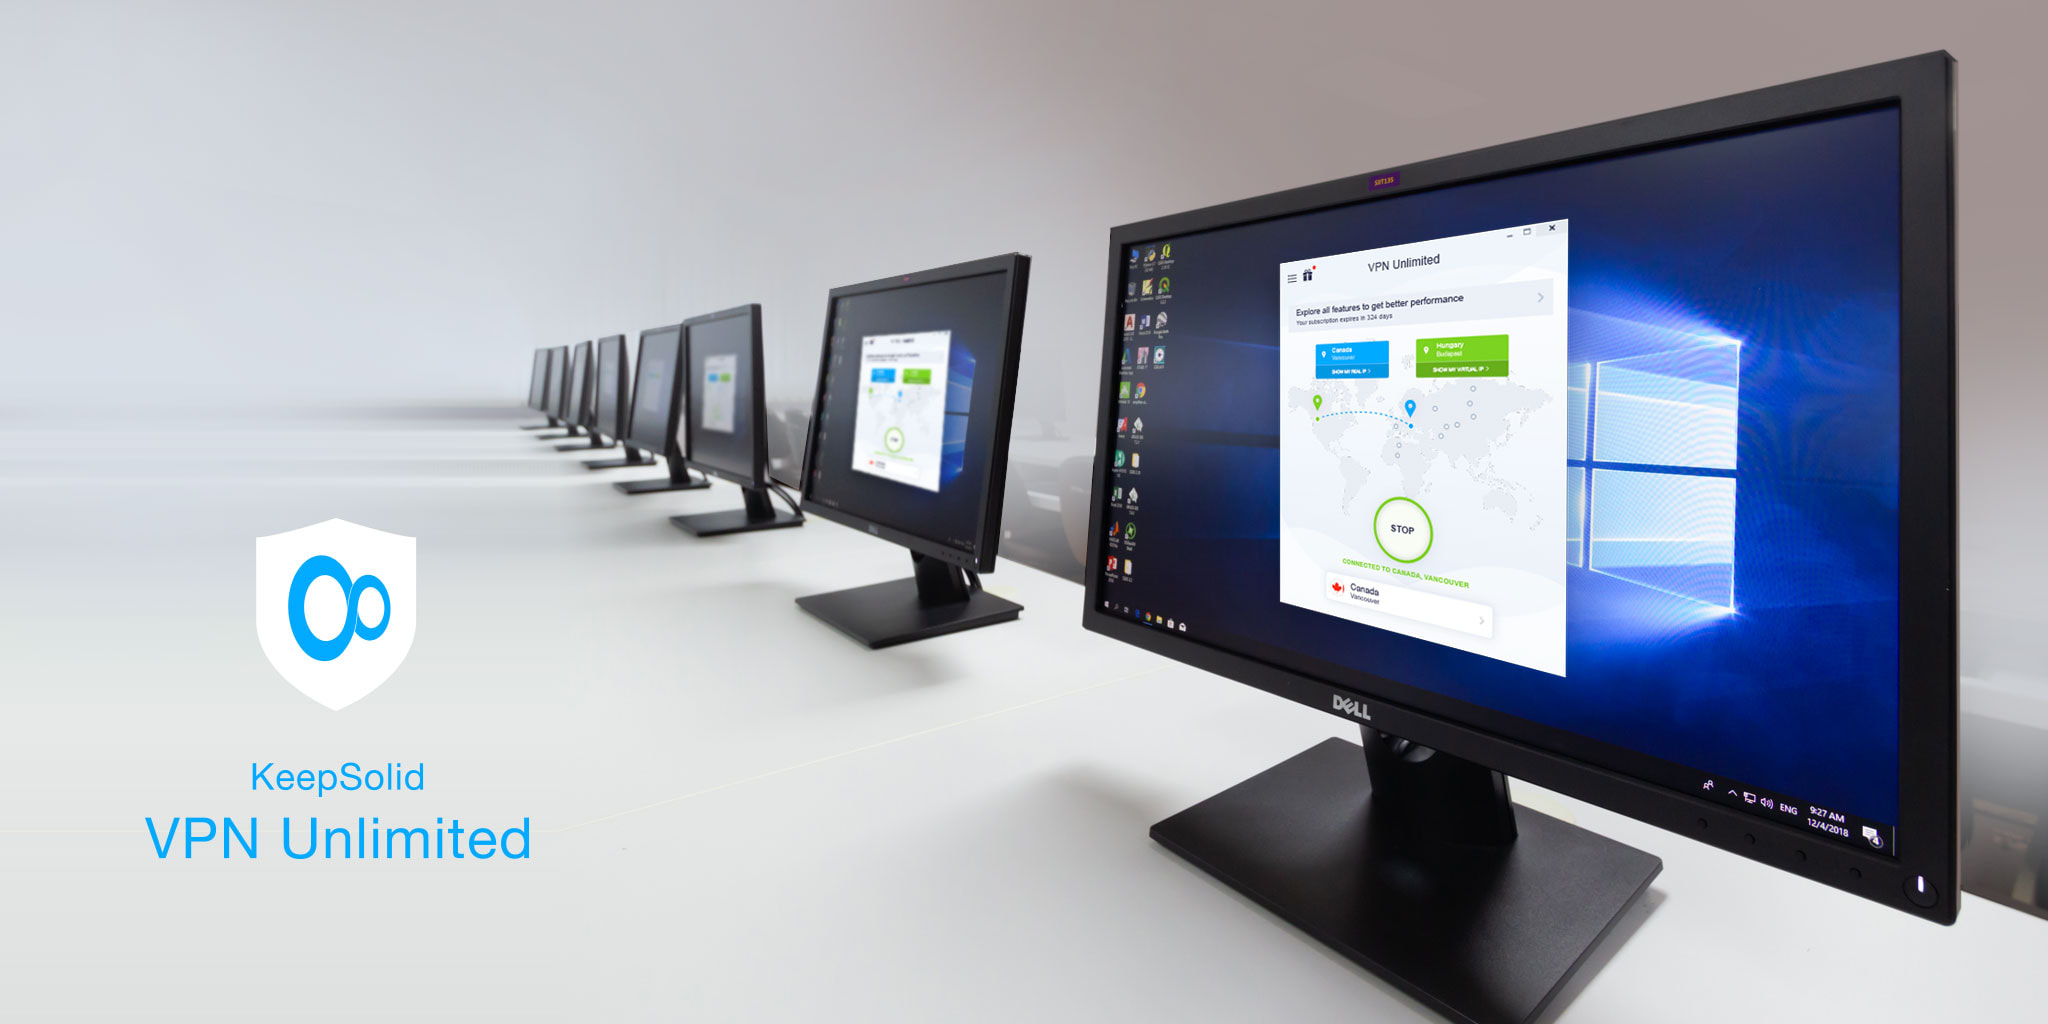 Computer monitors showing the screen with Microsoft Windows 10 and VPN Unlimited